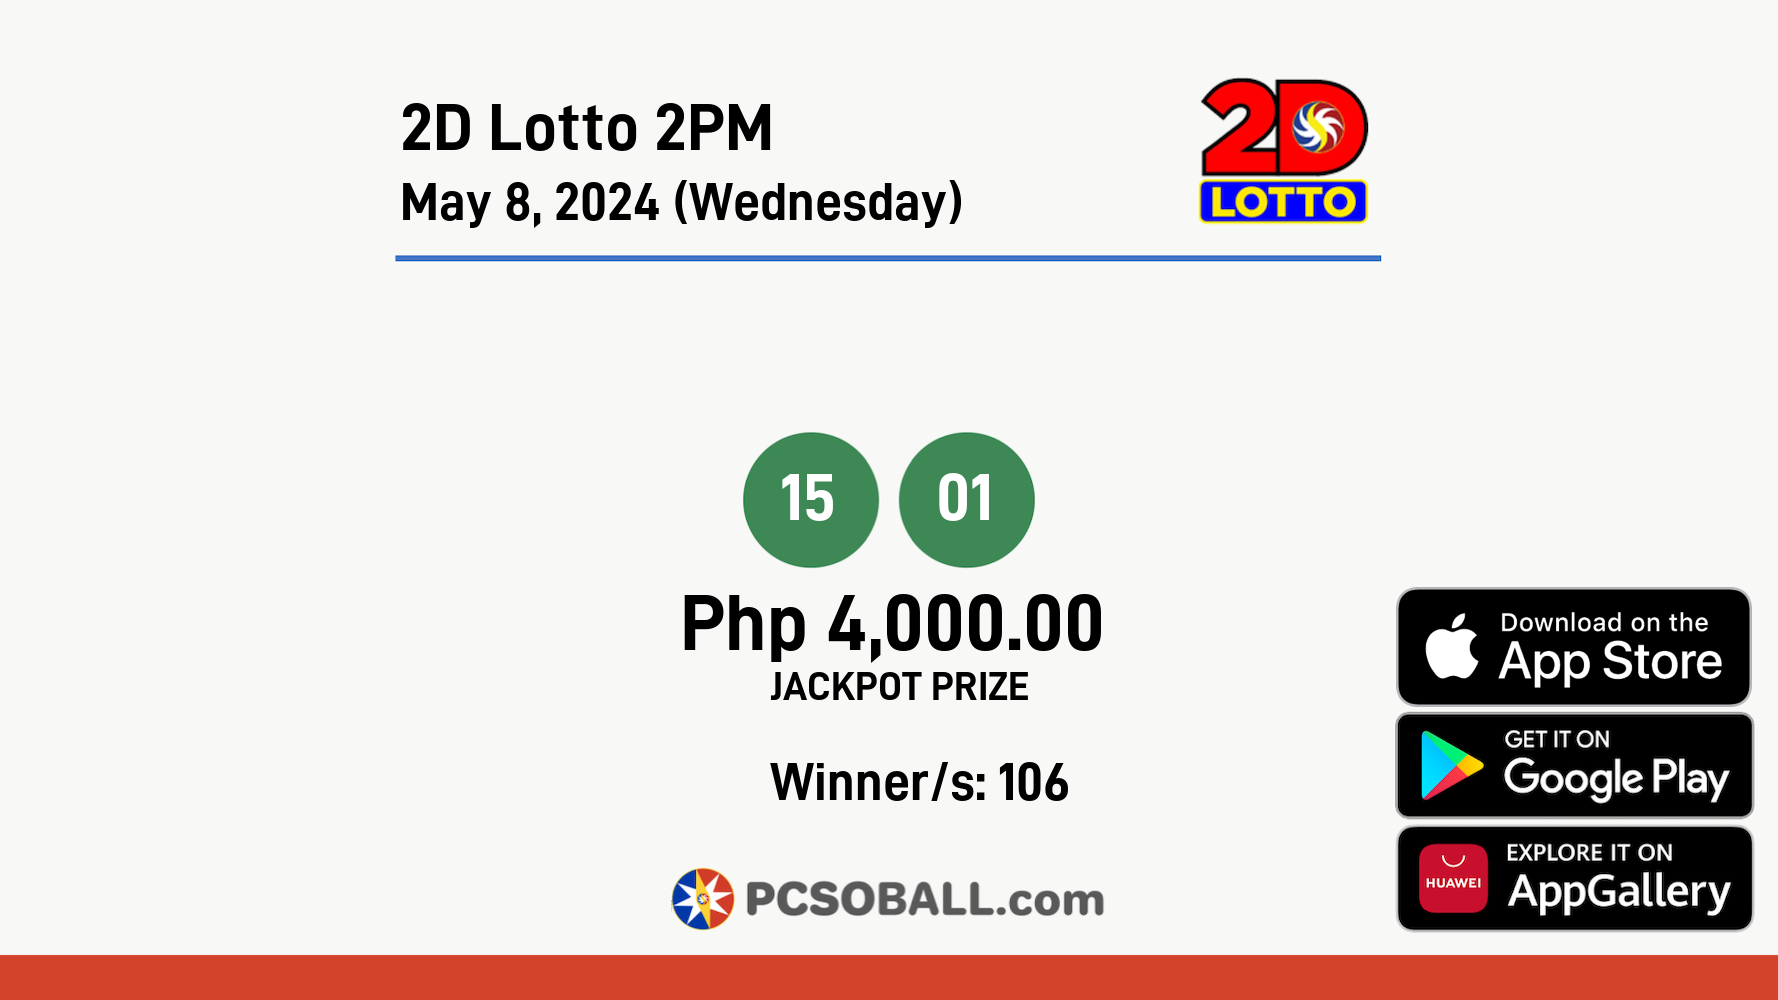 2D Lotto 2PM May 8, 2024 (Wednesday) Result